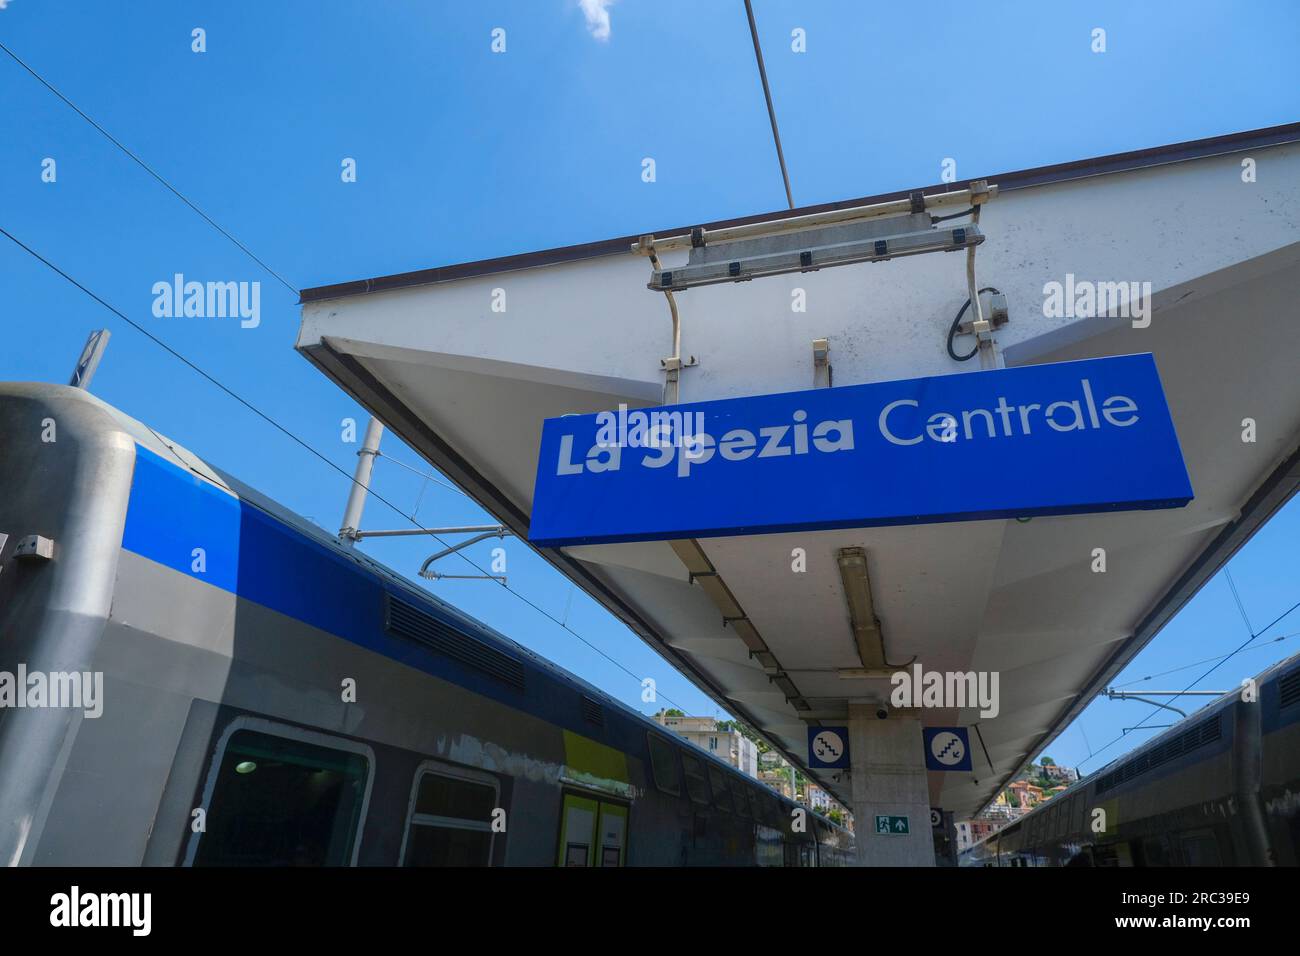 La Spezia Centrale sign on the railway station across the trains and station infrastructure Stock Photo